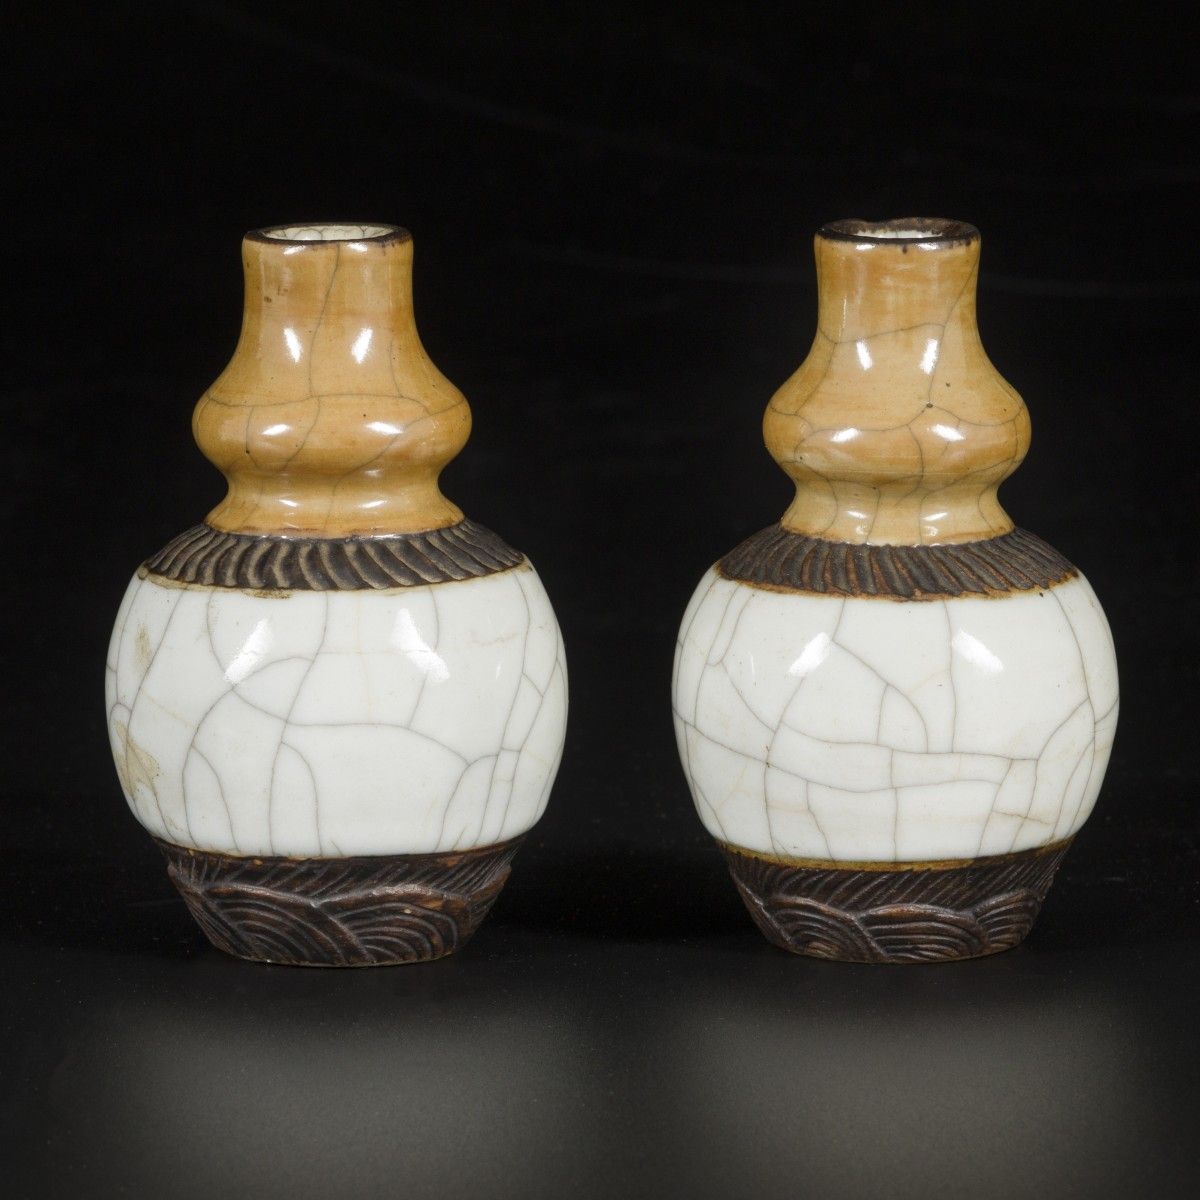 A set of (2) vases in Nanking earthenware, China, 19th century. Dim. 13 x 8 cm. &hellip;